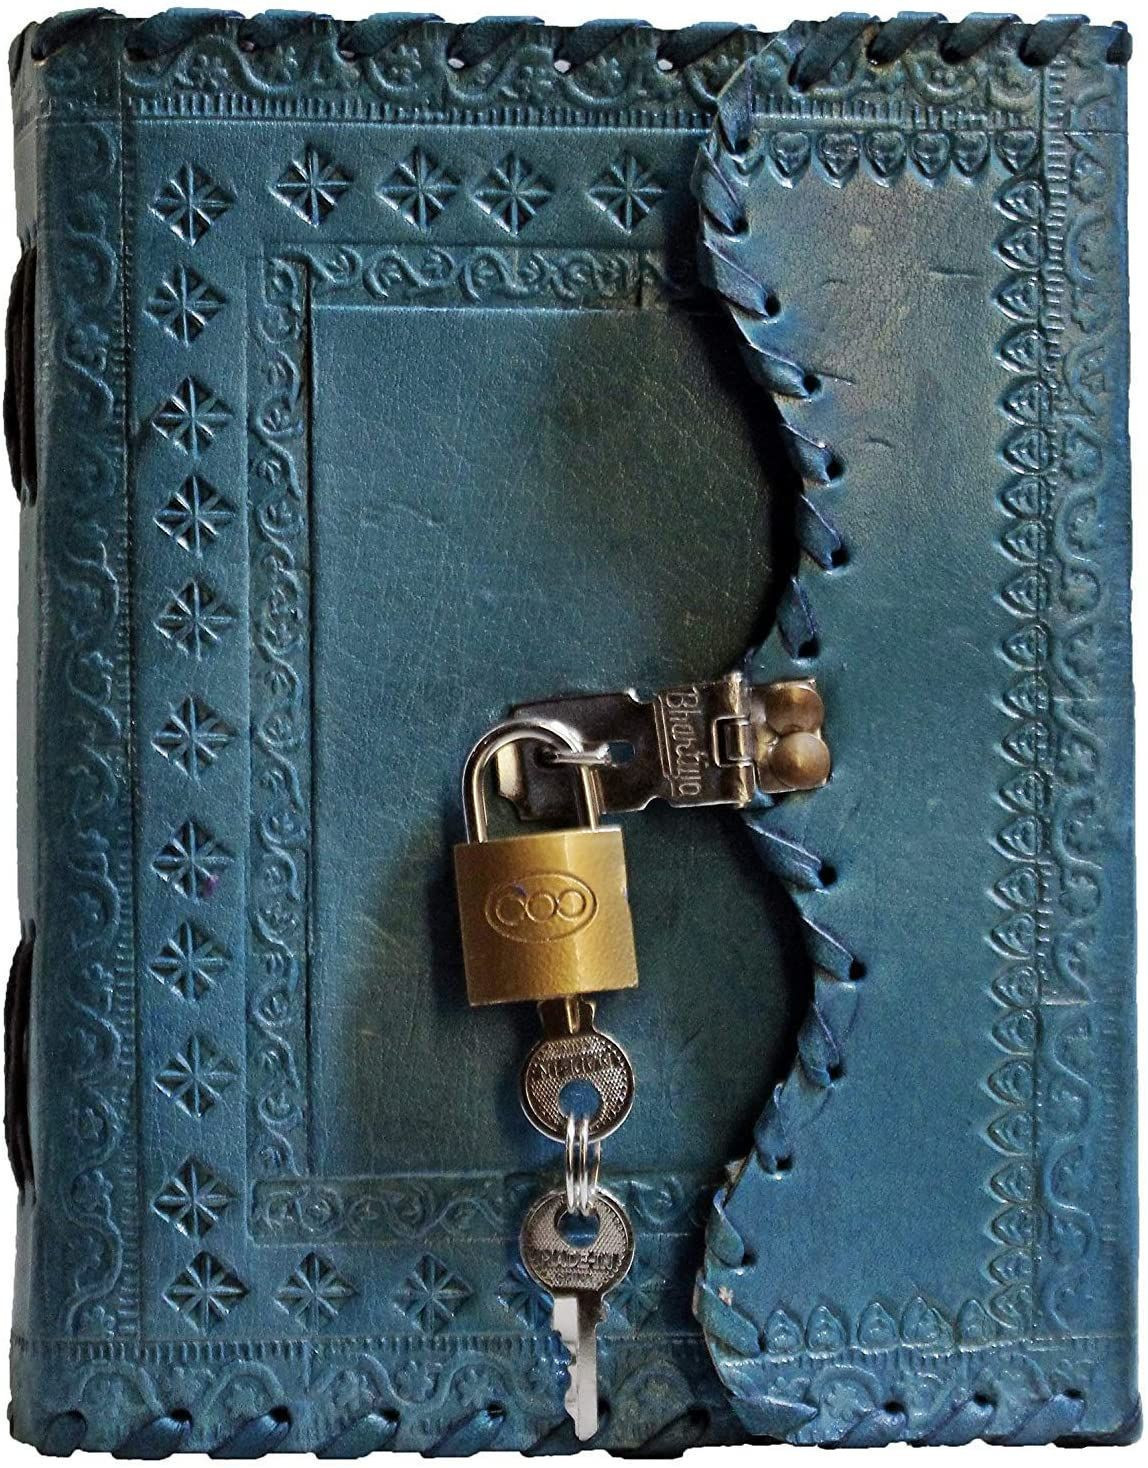 TUZECH Leather Genuine Vintage Leather Journal Travel Diary Write Poems Notebook Perfect Gift